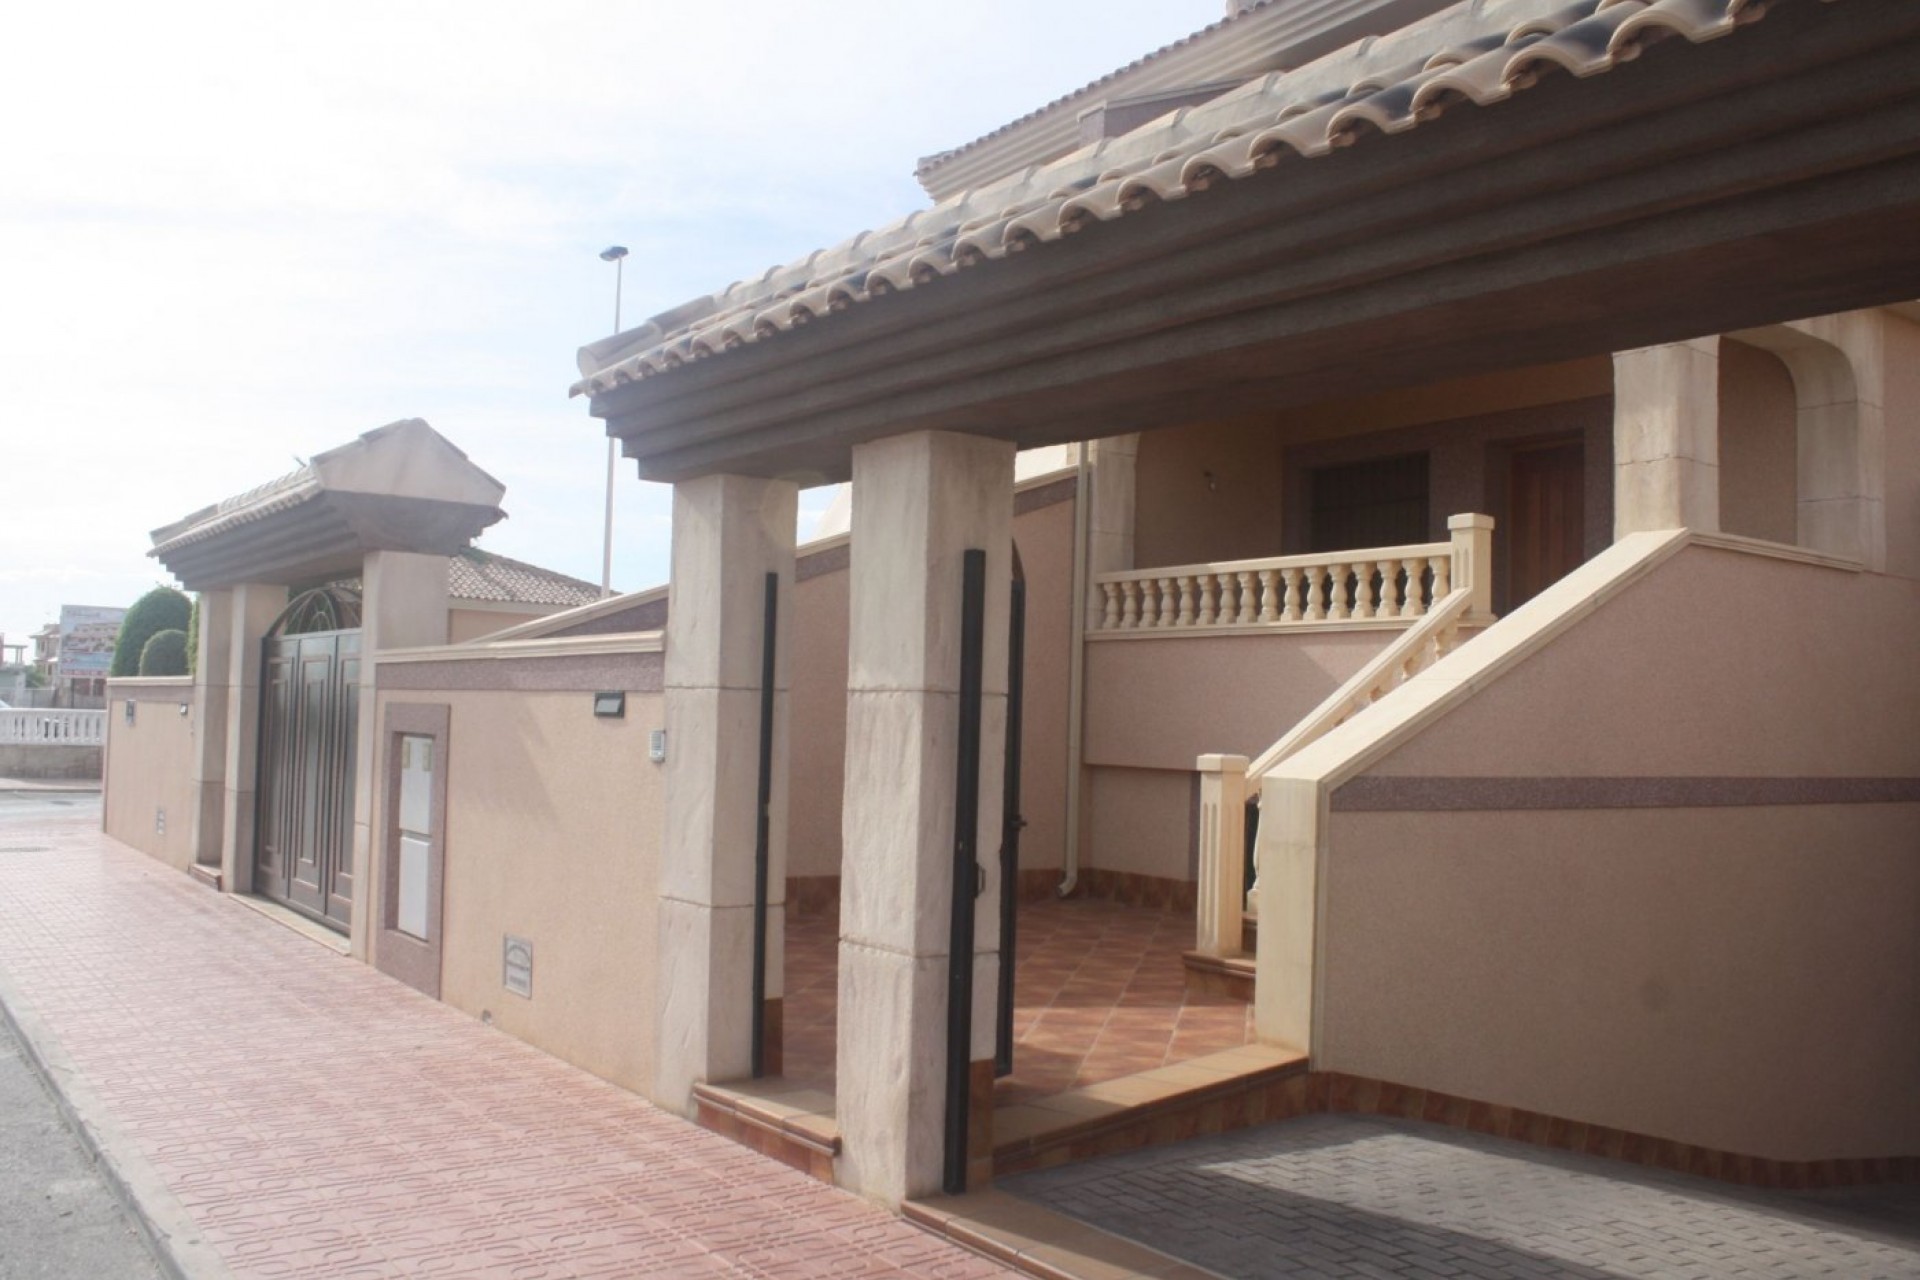 Nybyggnation - Town House -
Torrevieja - Los Altos